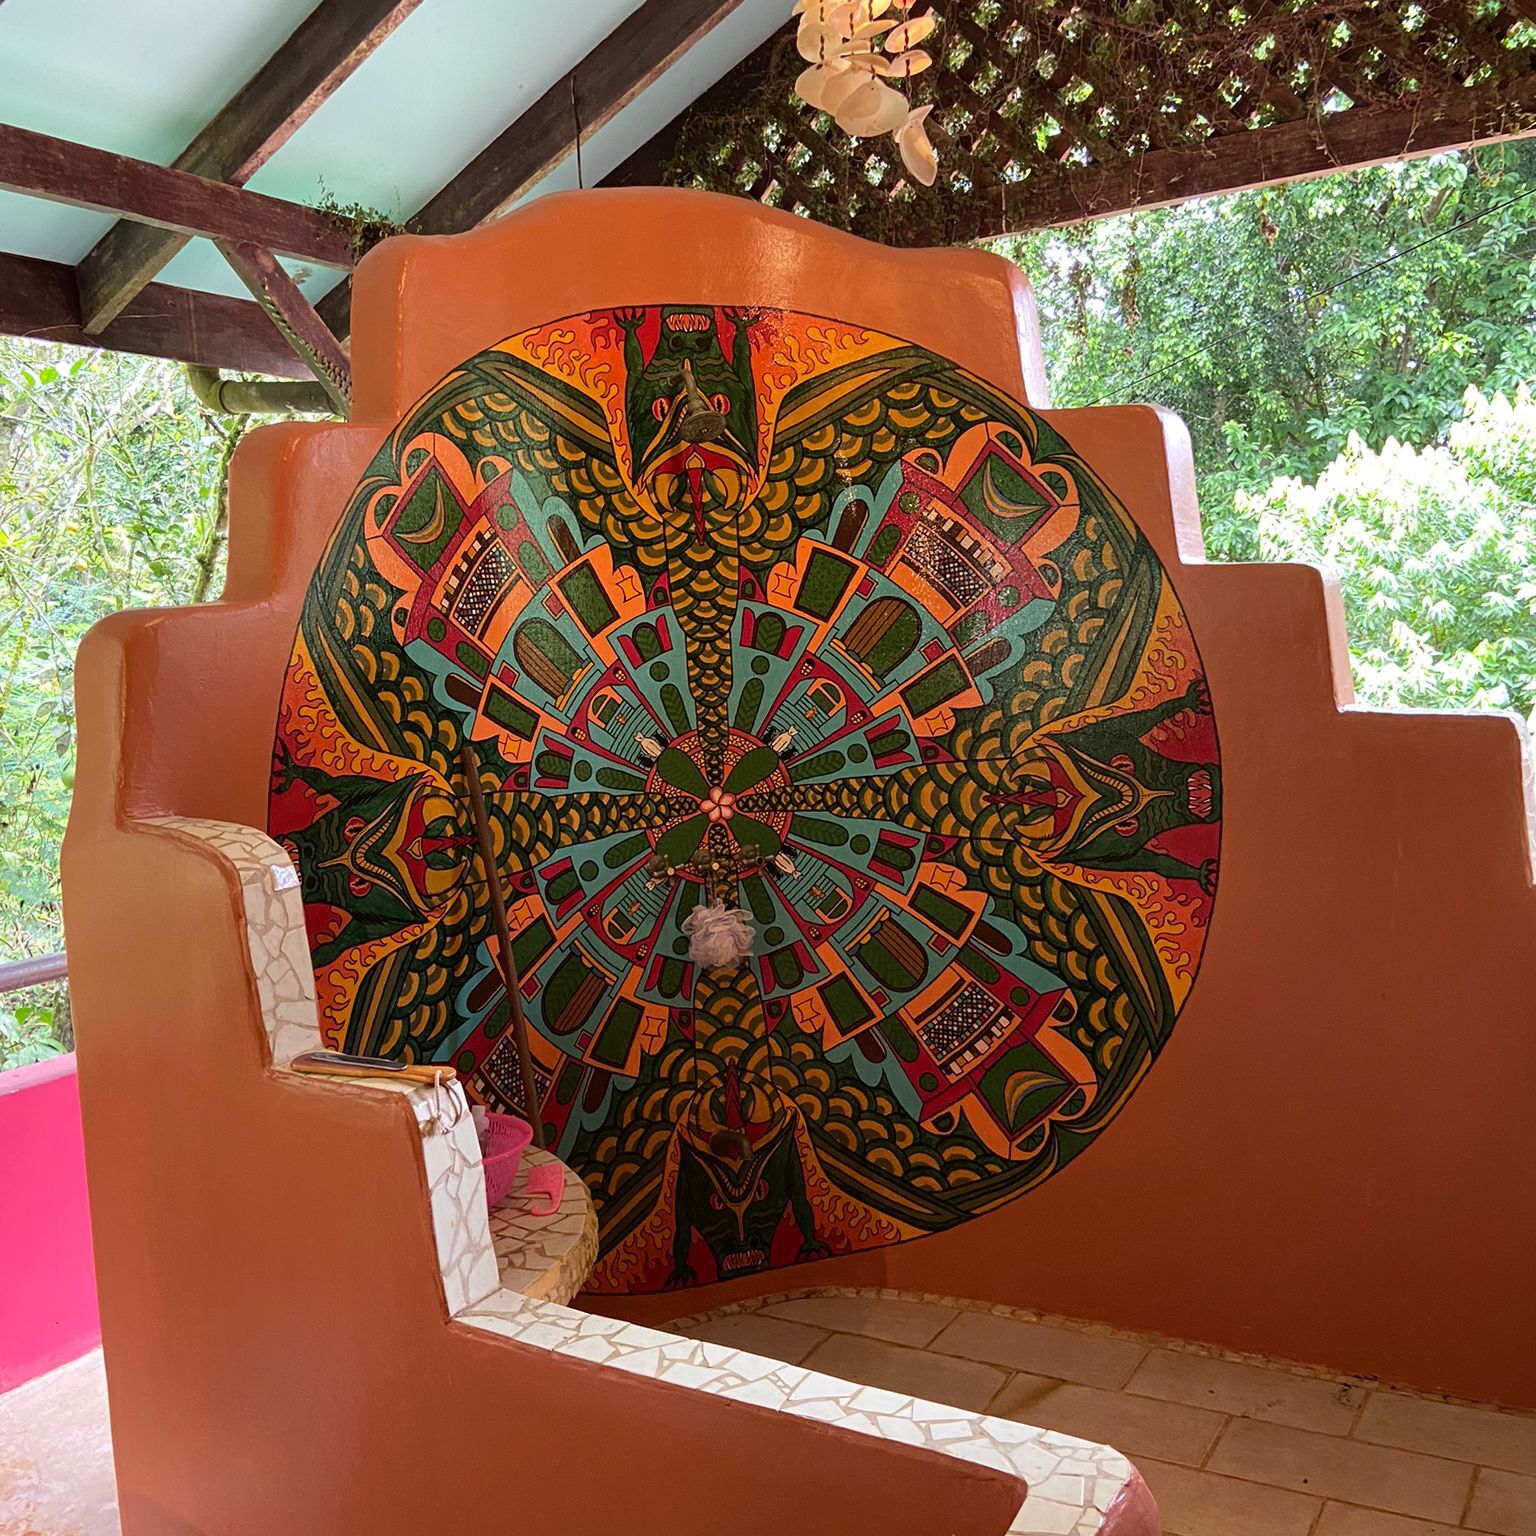 Photo of the complete Dragons Lair mural on the upstair shower wall of the private home in Puerto Viejo, Costa Rica.